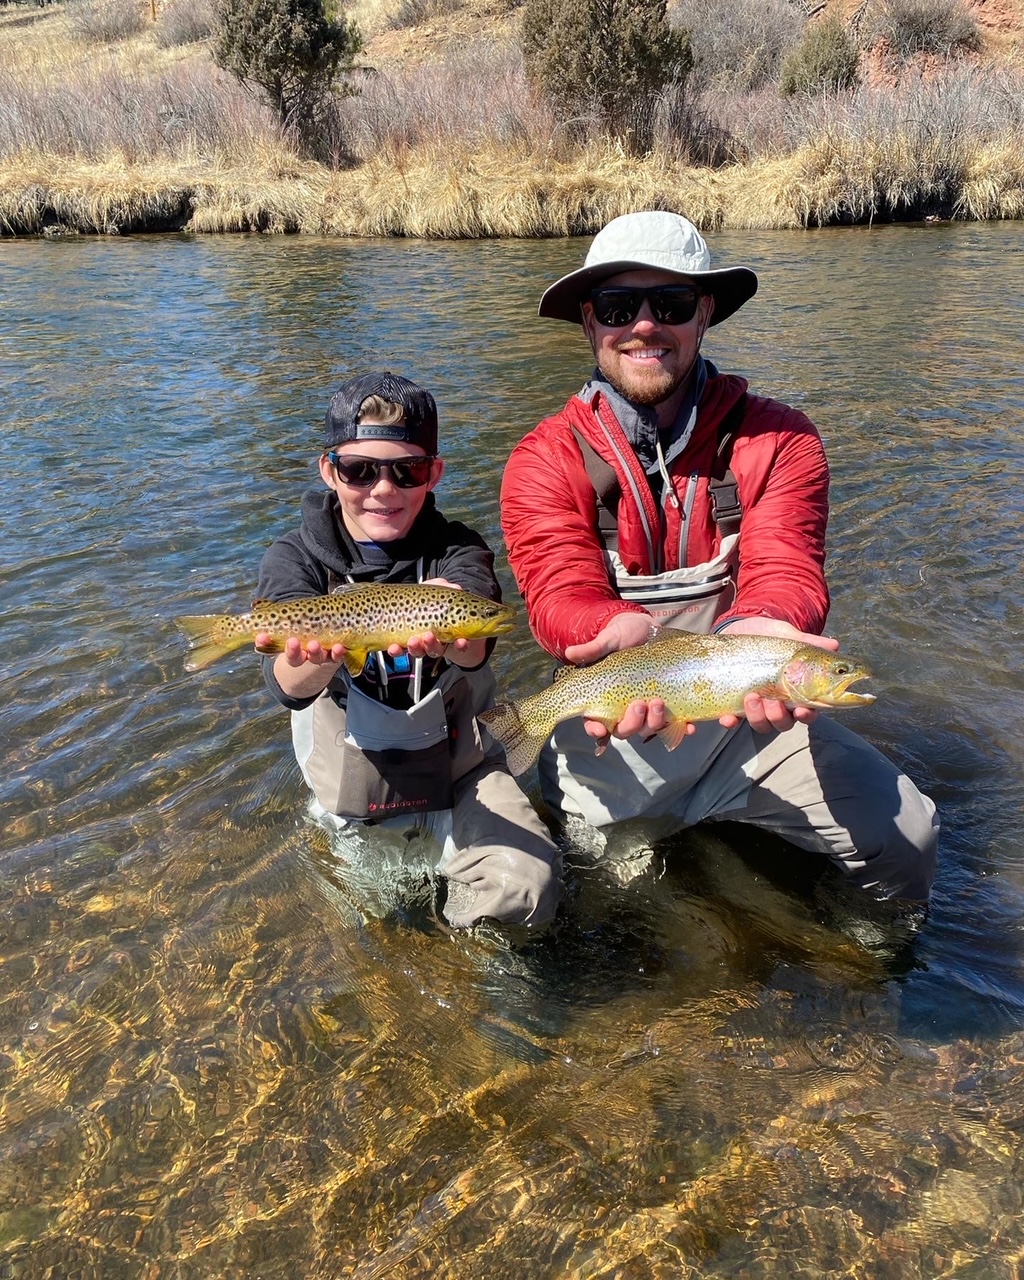 Guided fly fishing trips for kids!